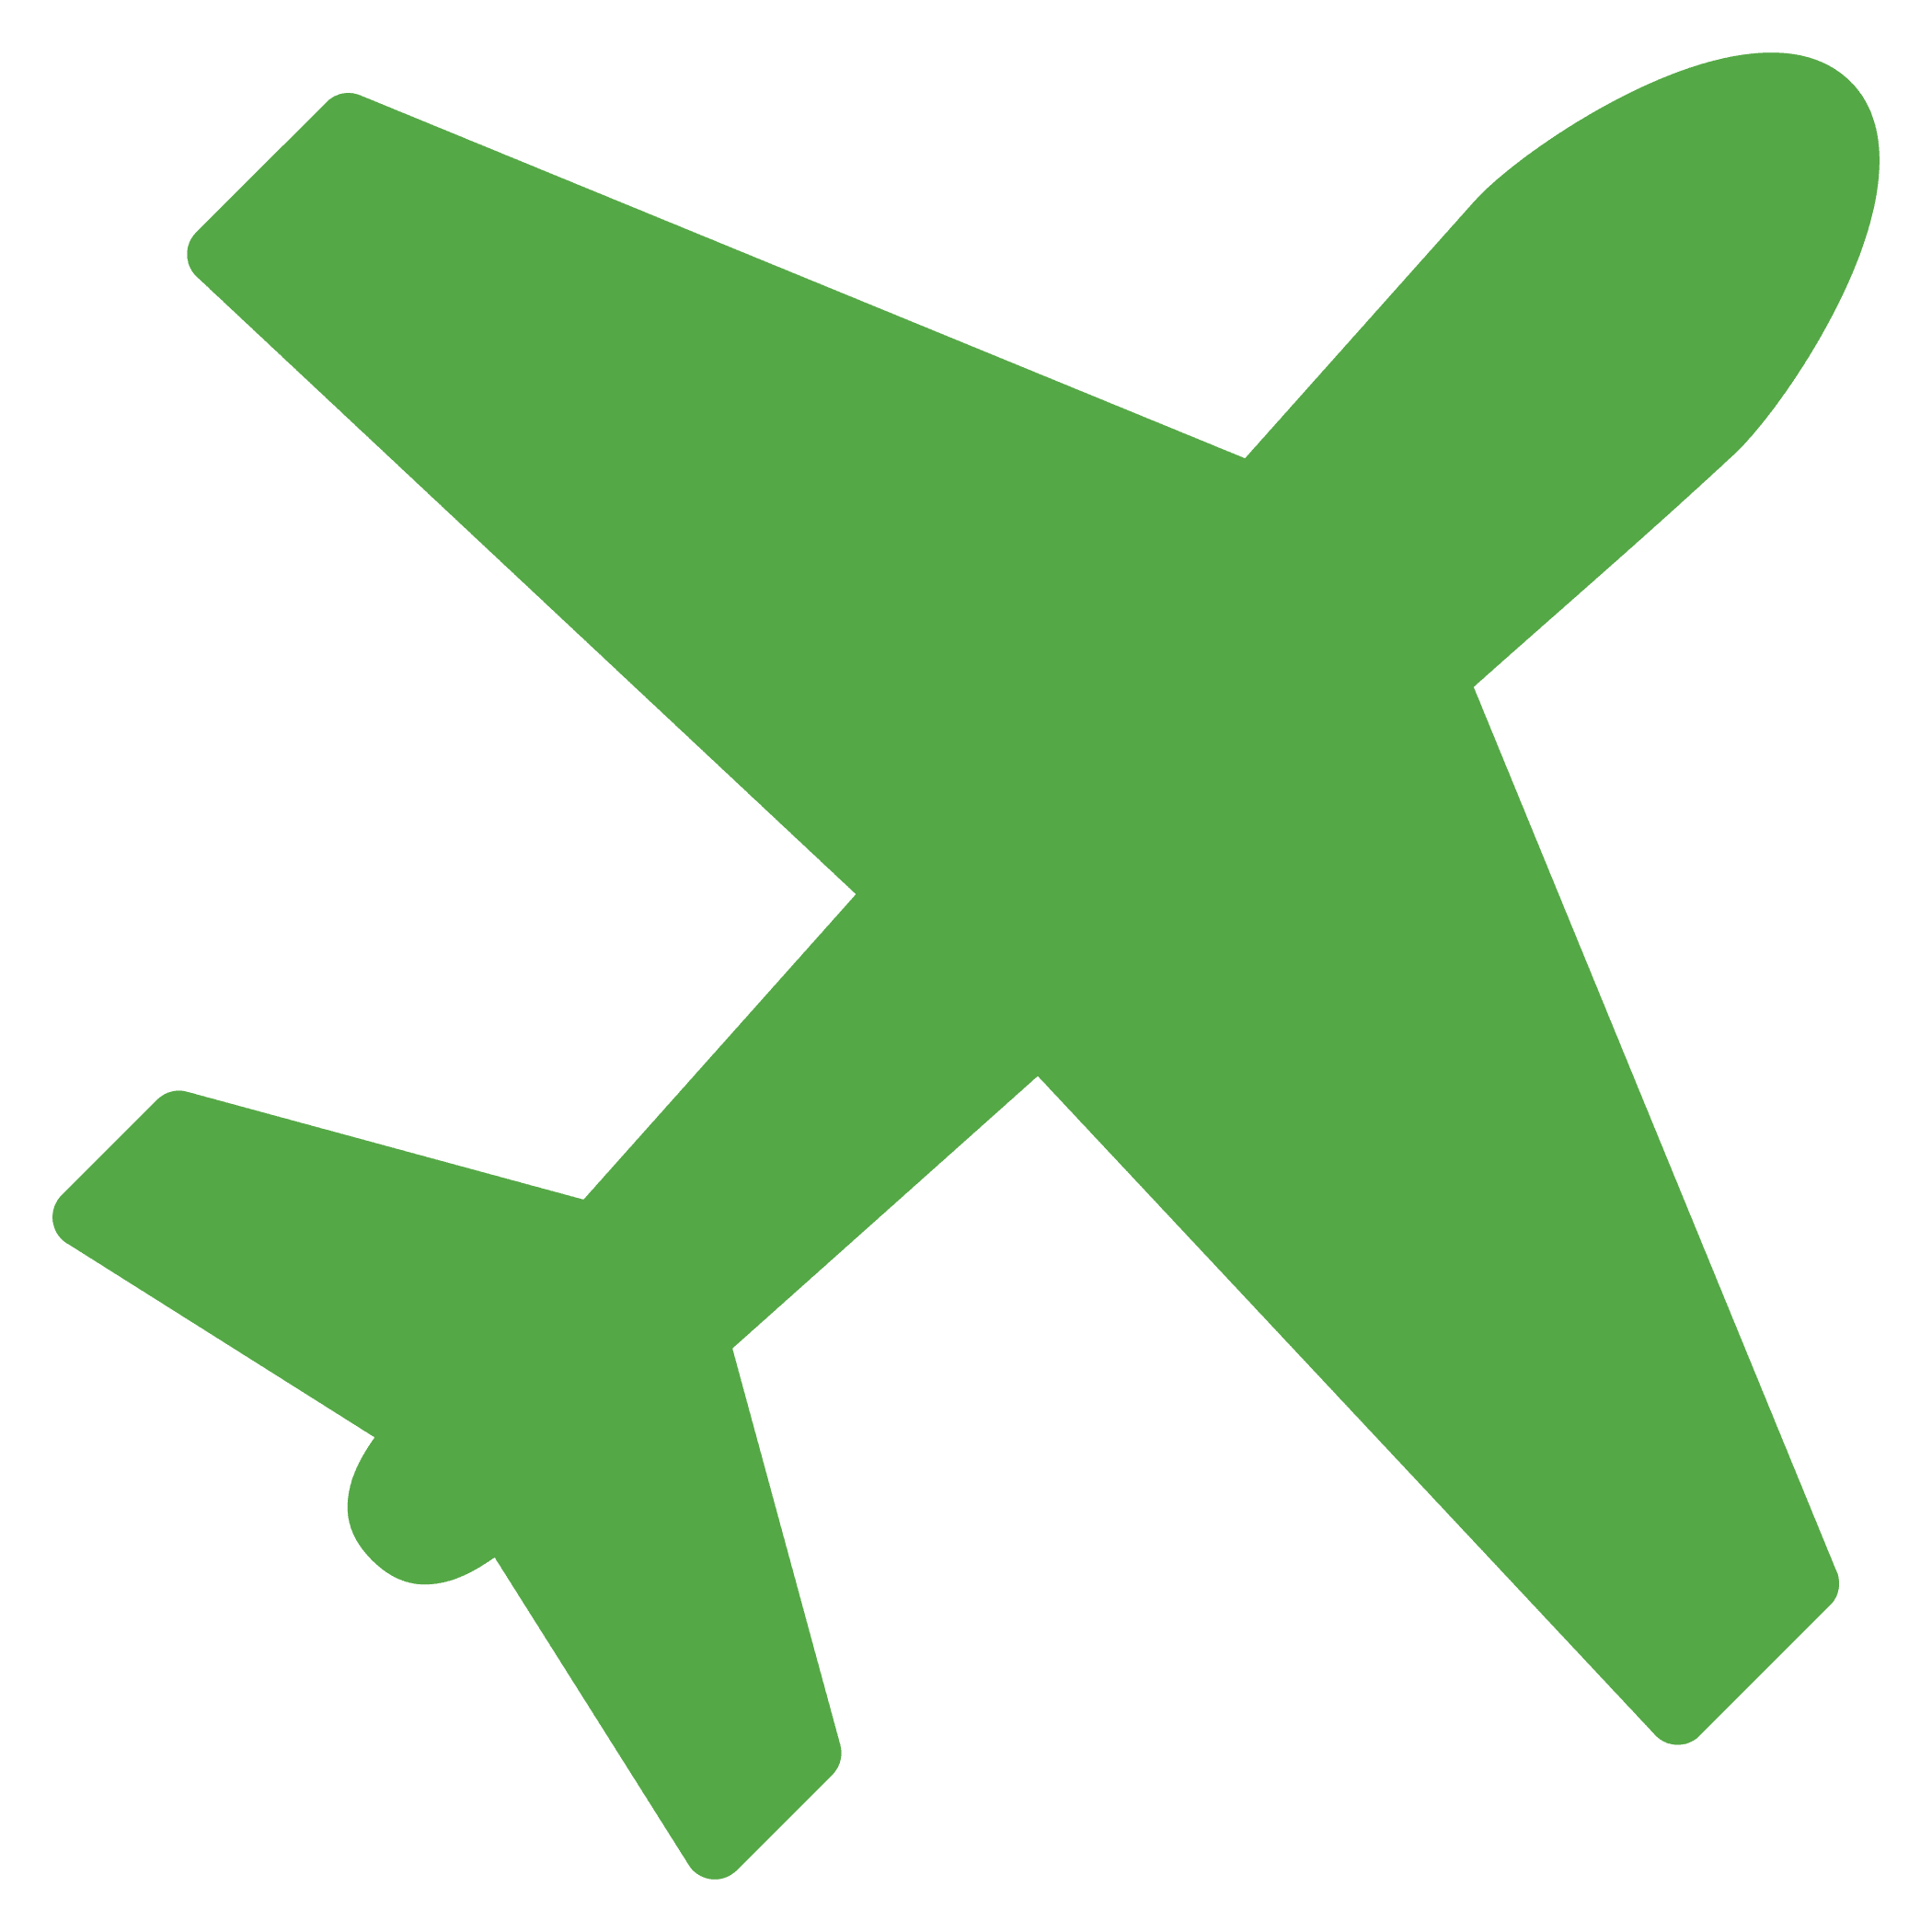 Green airplane icon